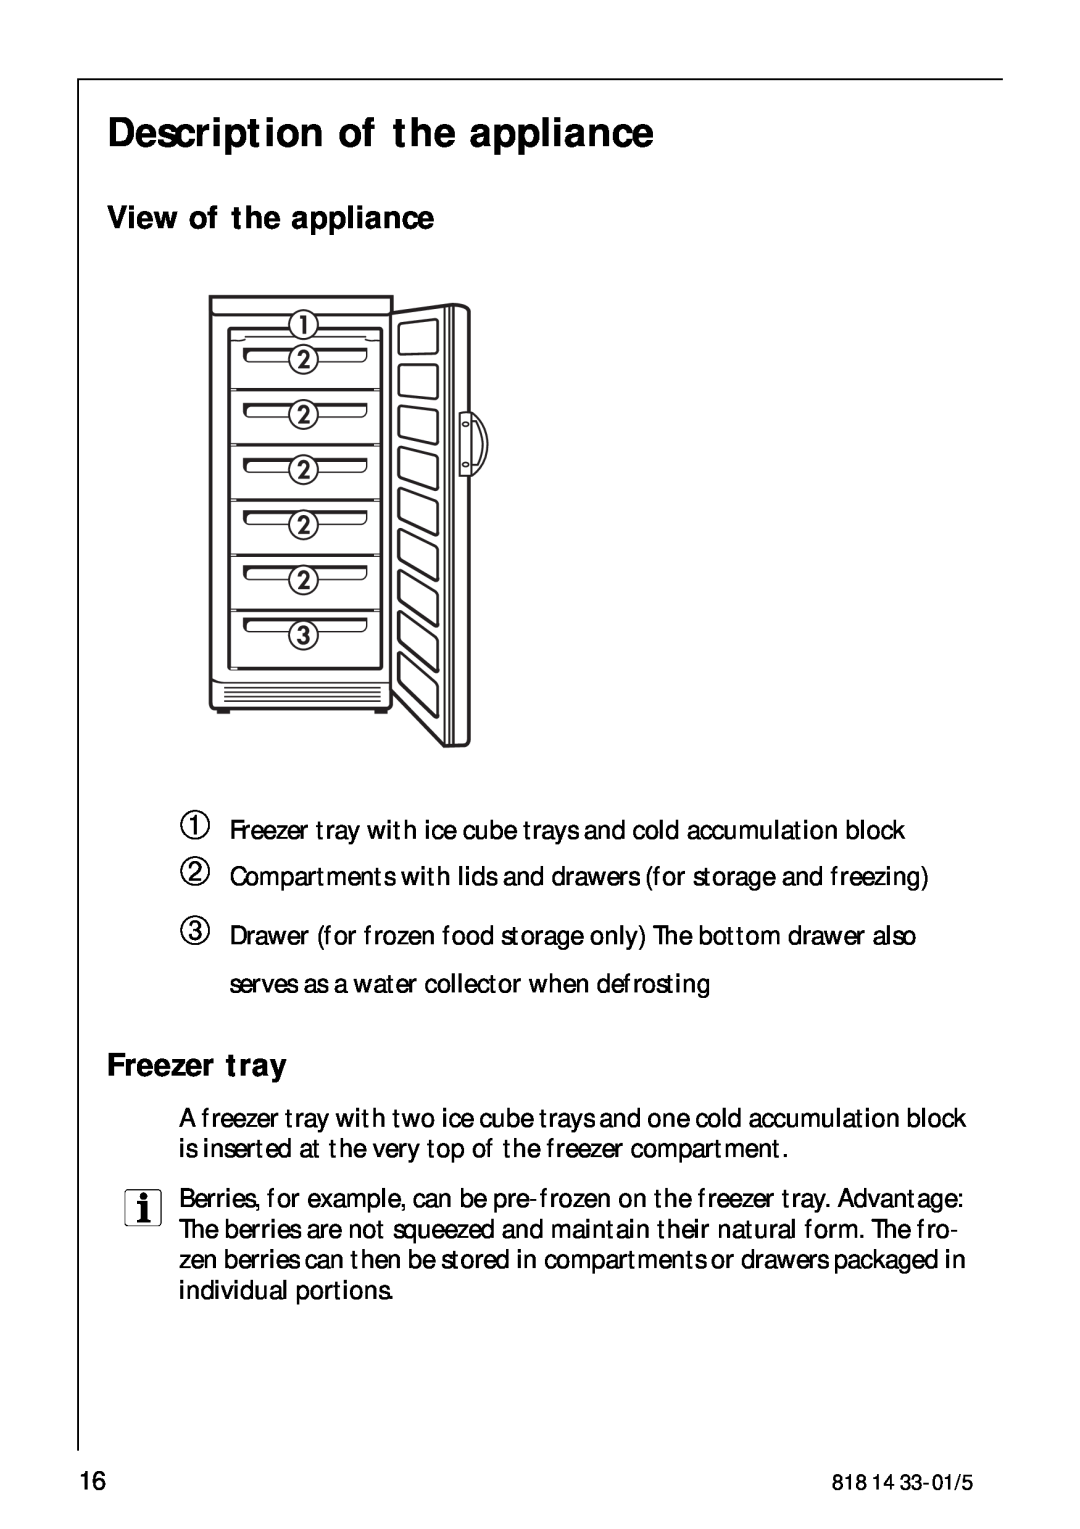 AEG 2150-6GS manual Description of the appliance, View of the appliance, Freezer tray 